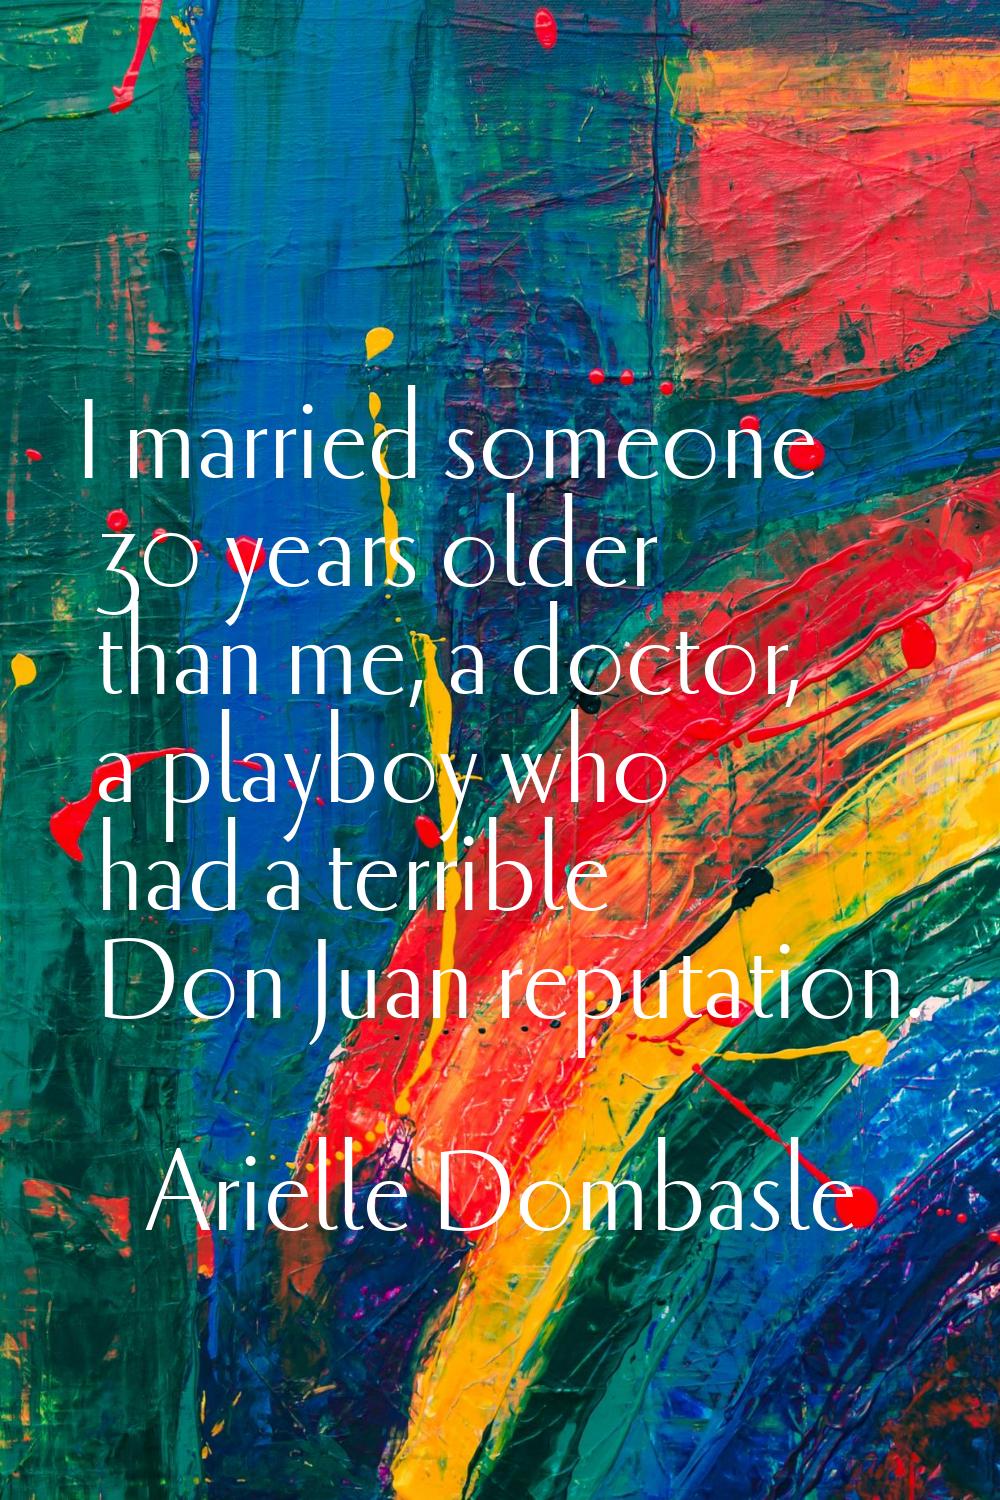 I married someone 30 years older than me, a doctor, a playboy who had a terrible Don Juan reputatio